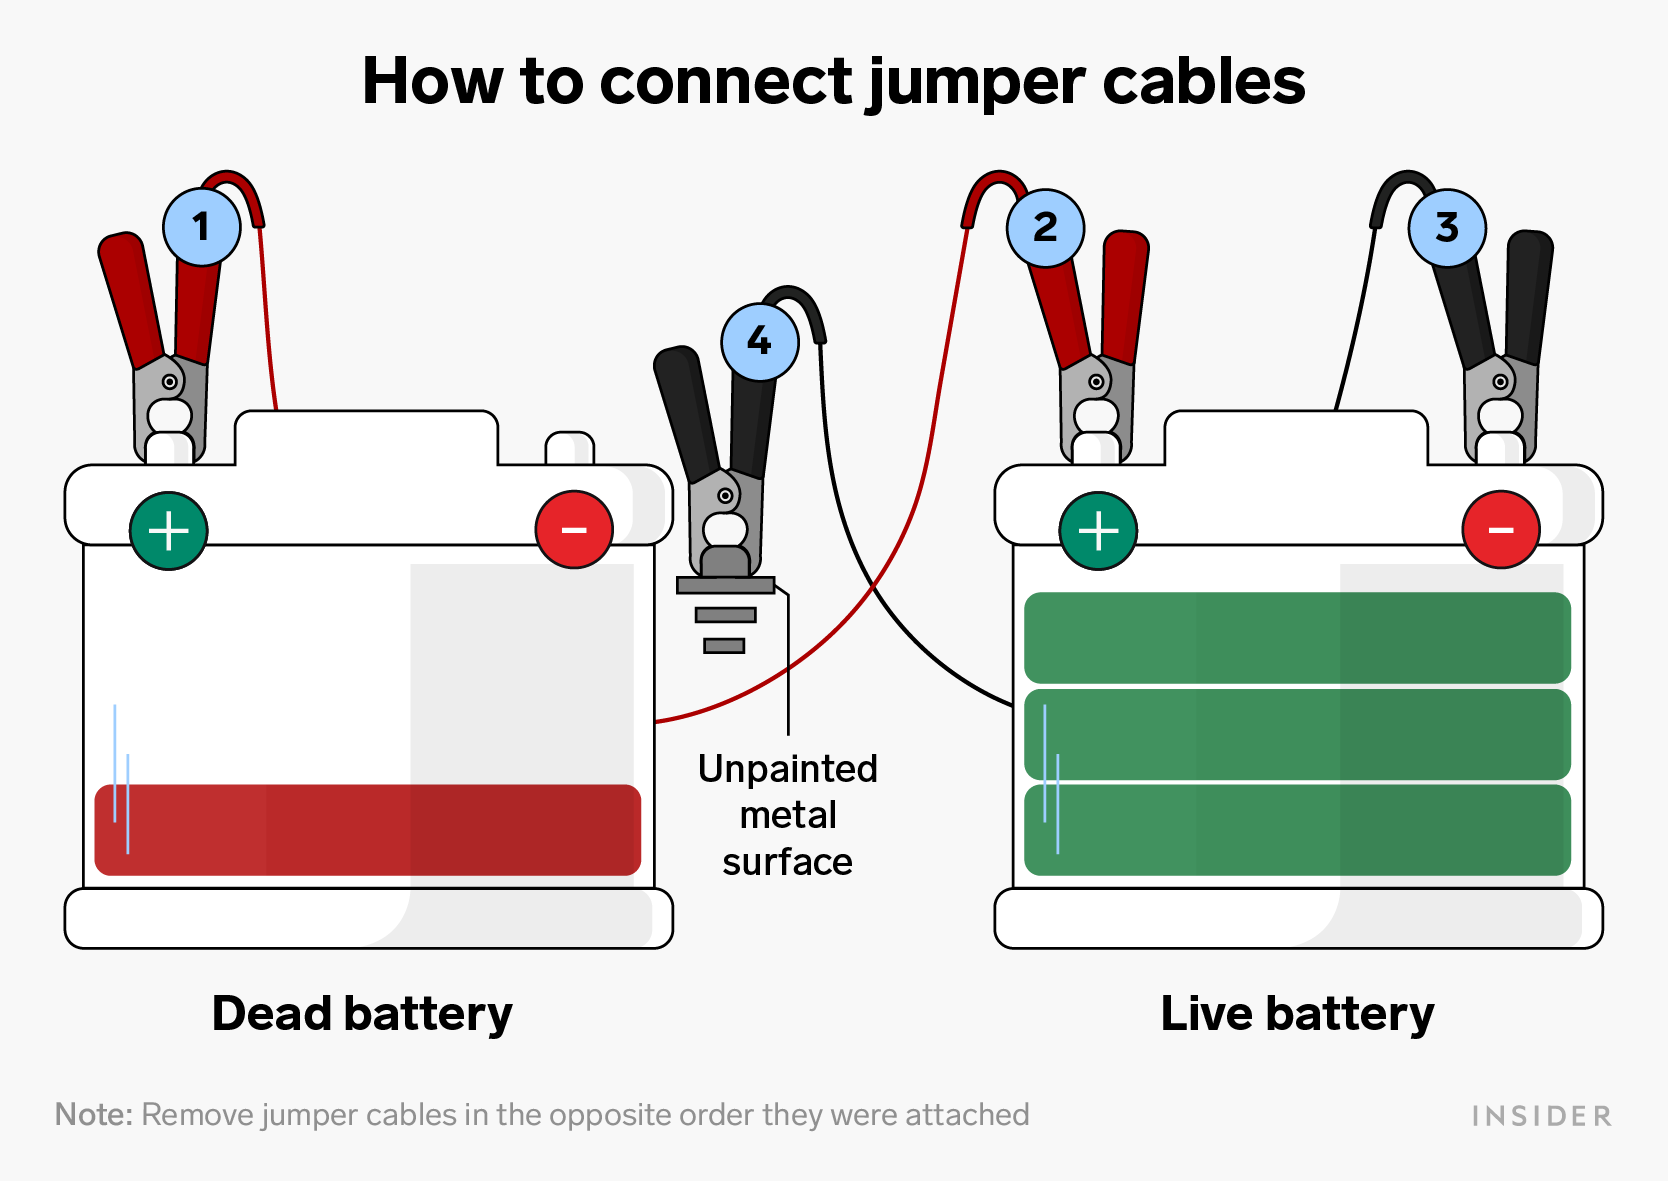 Annotated illustration of how to connect jumper cables